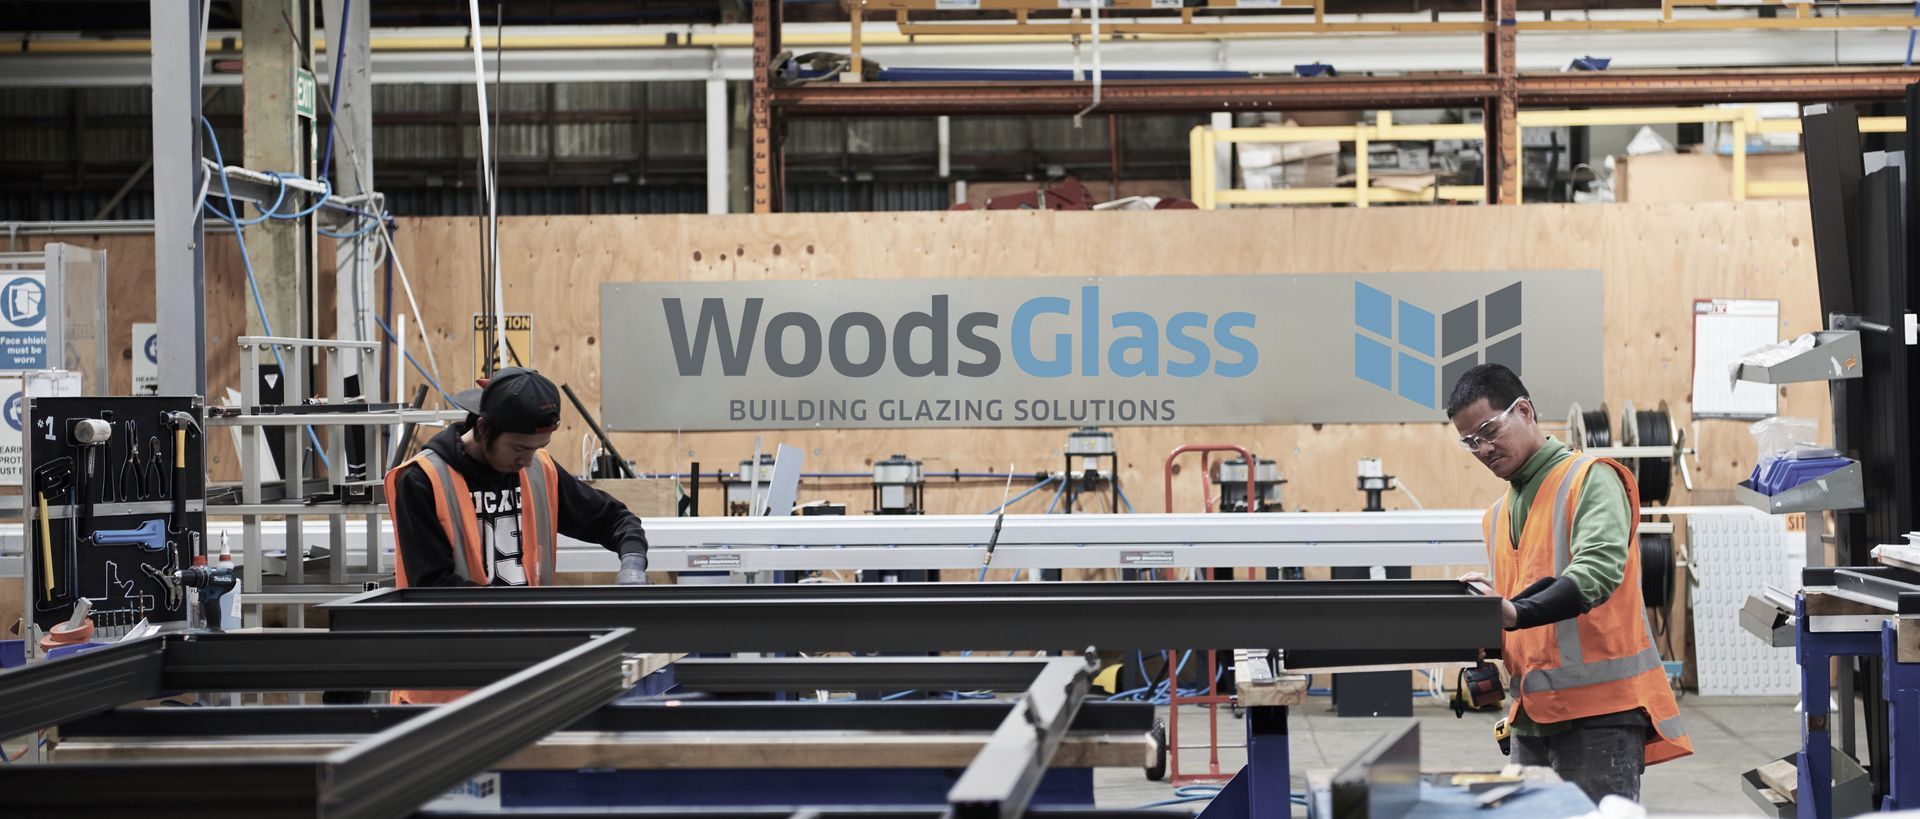 Woods Glass Banner image